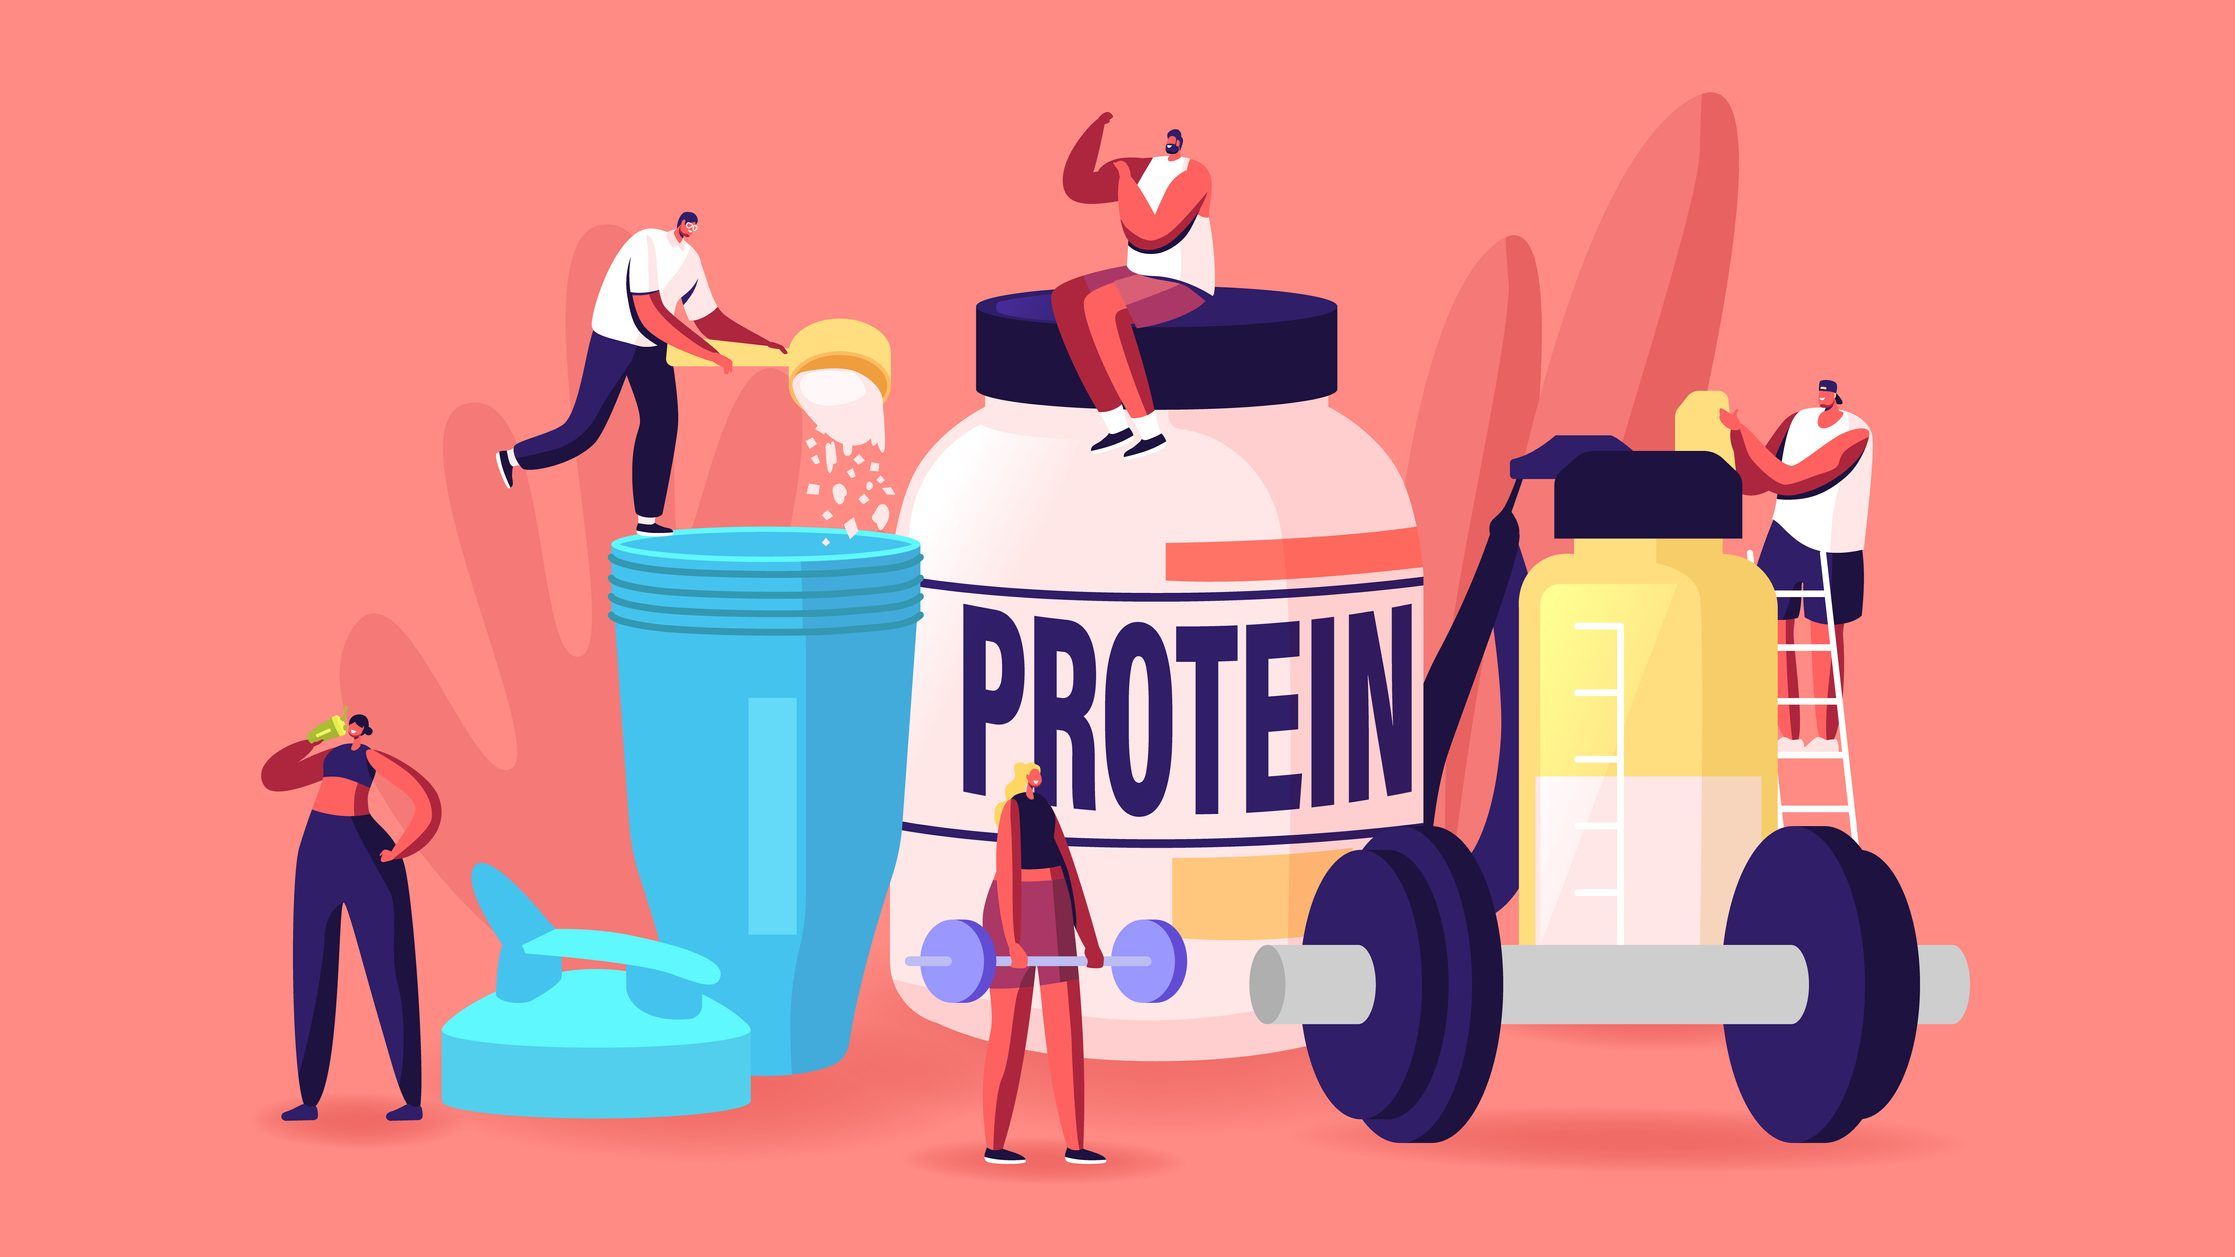 How much protein we need also varies widely from person to person based on age, sex, weight, exercise routine and other lifestyle factors. GETTY